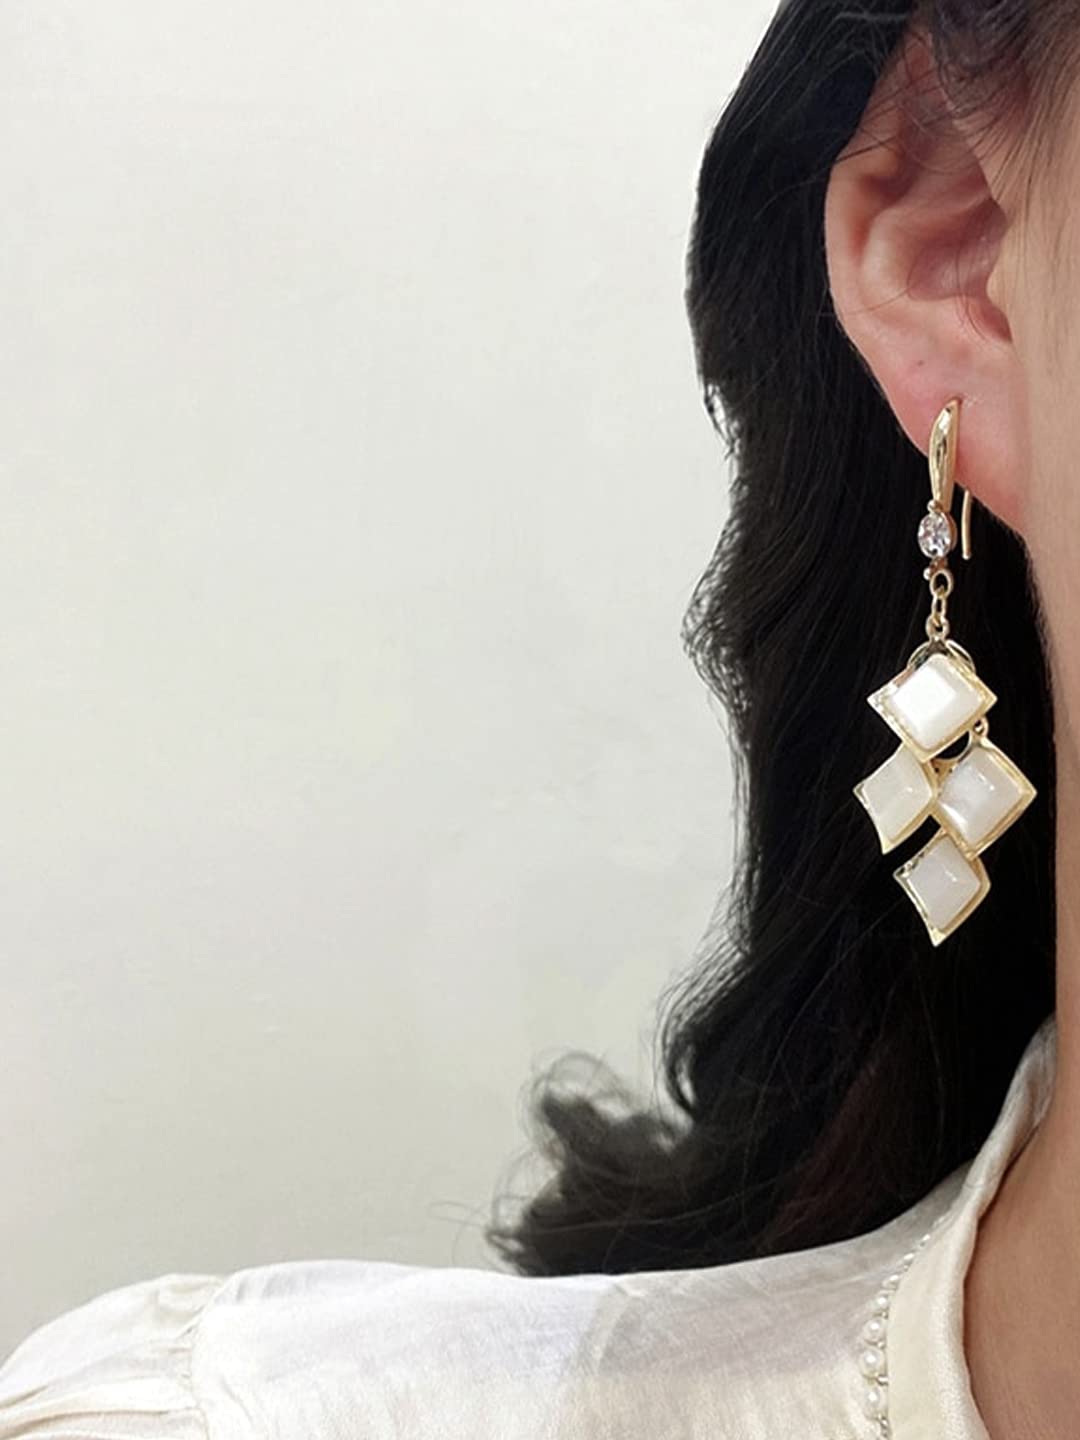 Yellow Chimes Earrings For Women White Color Crystal Studded Geometrical Shape Drop Earrings For Women and Girls